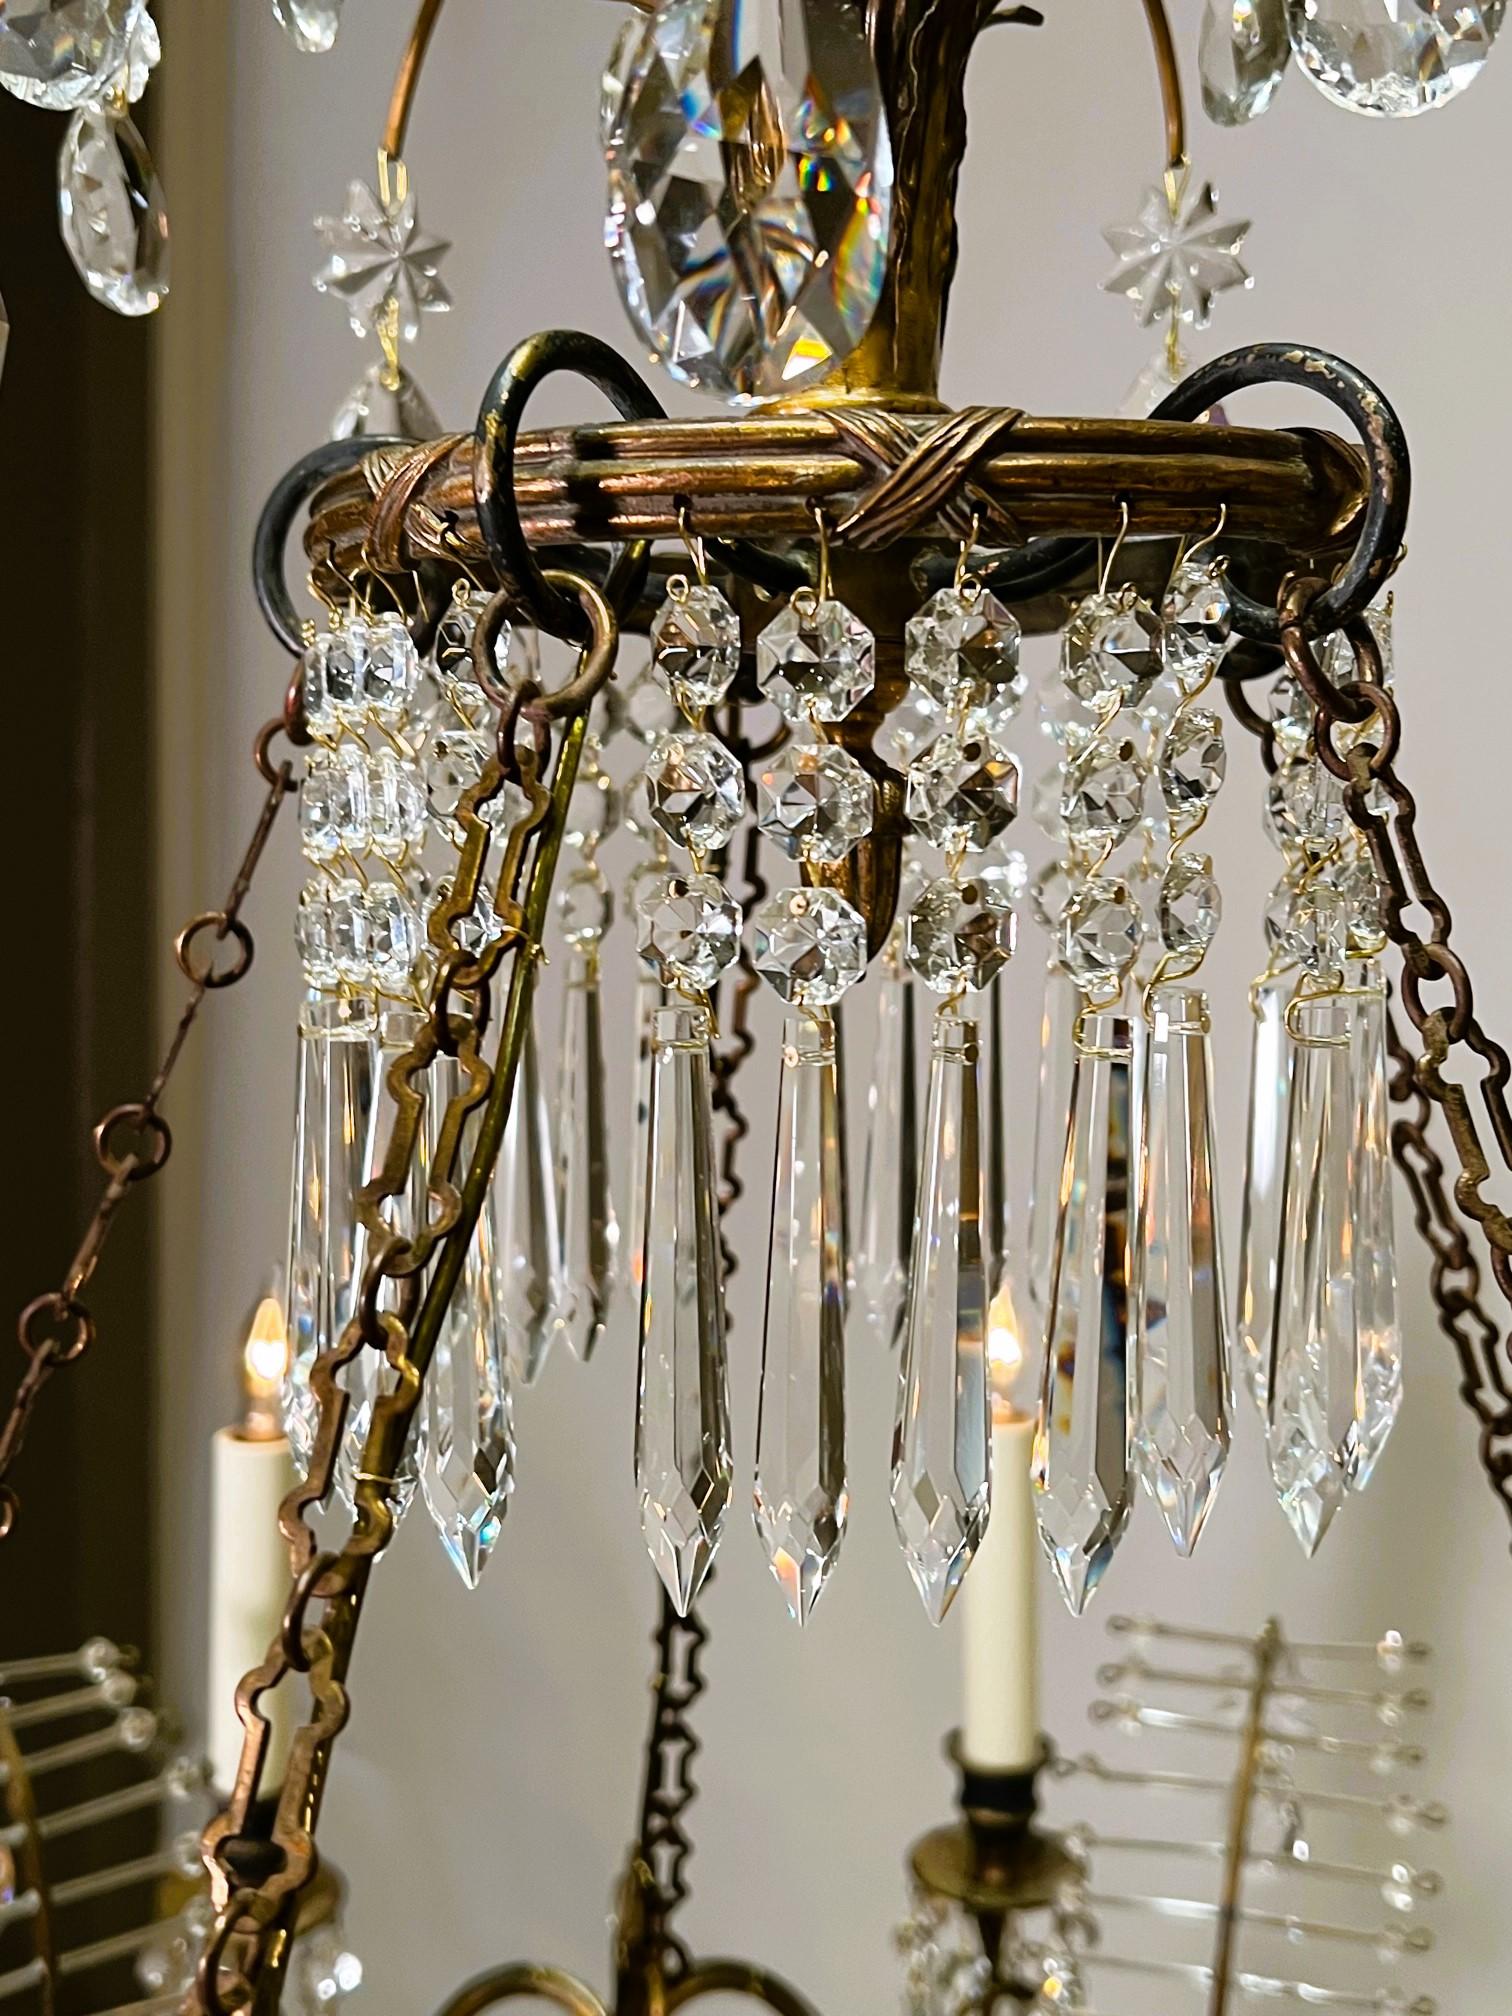 Neo-Classic Style 10-Light Bronze & Crystal Chandelier, Italy, Circa:1920 For Sale 1